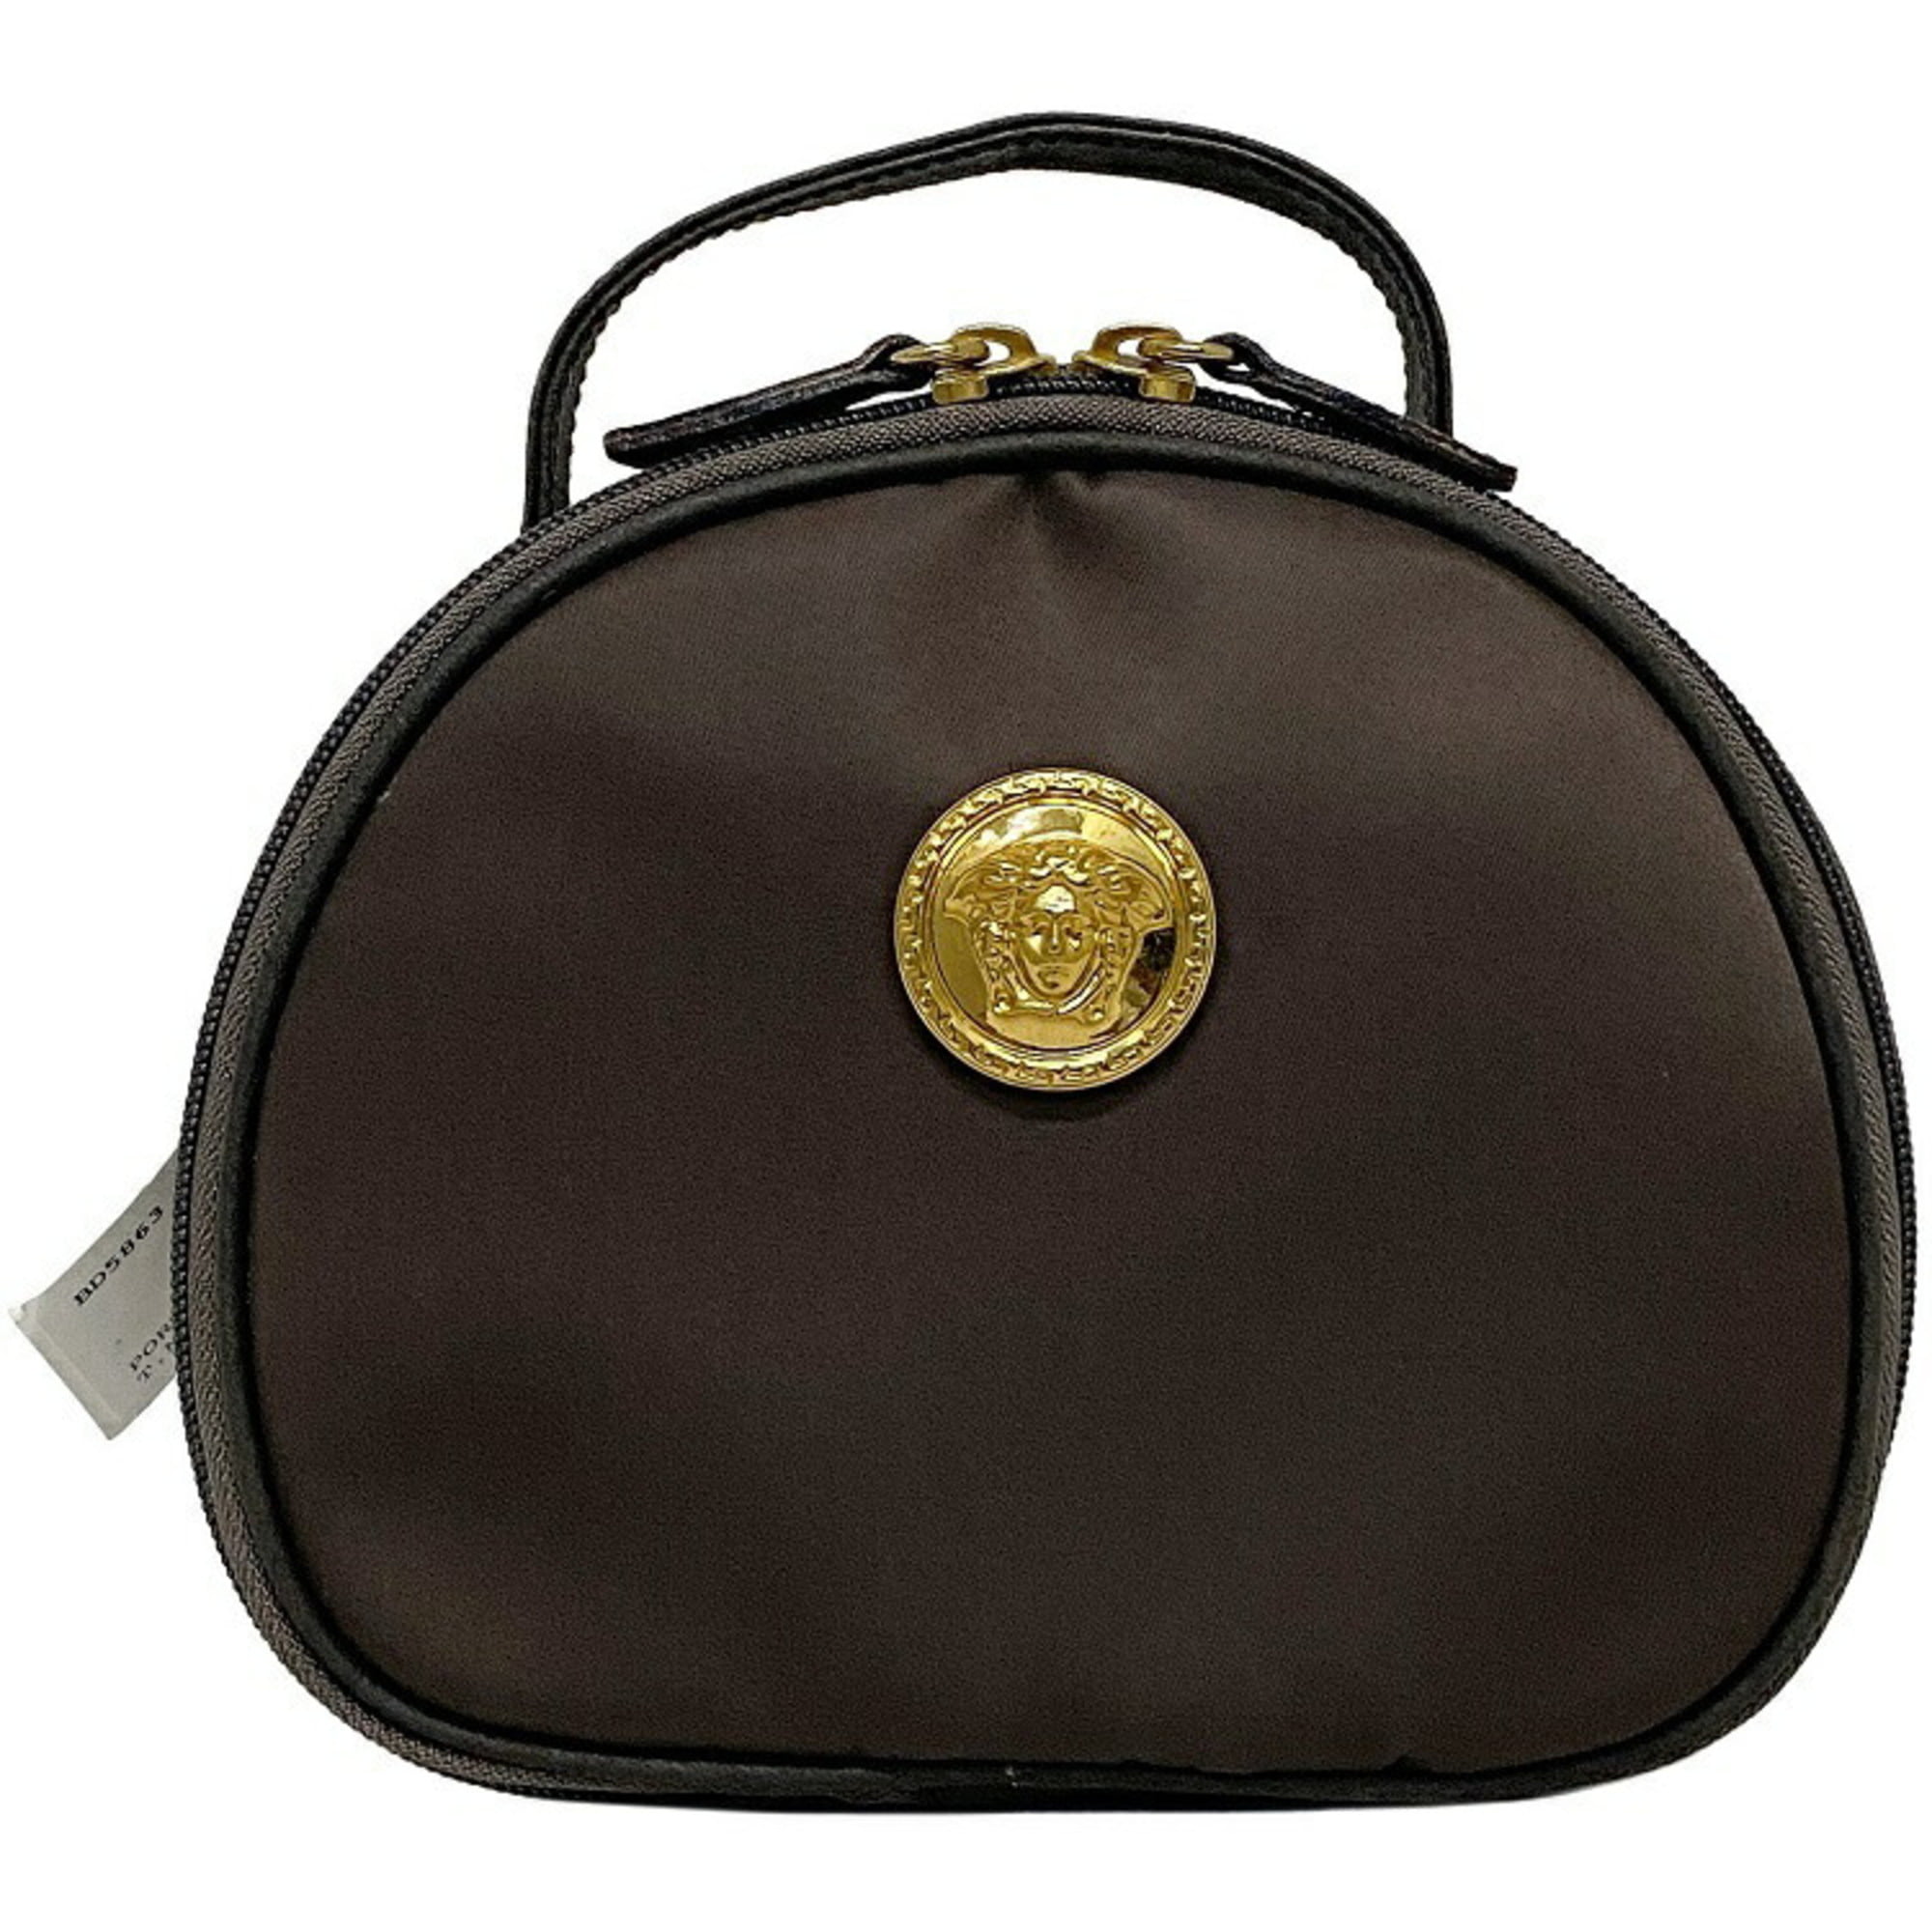 Versace - Authenticated Handbag - Leather Brown for Women, Good Condition